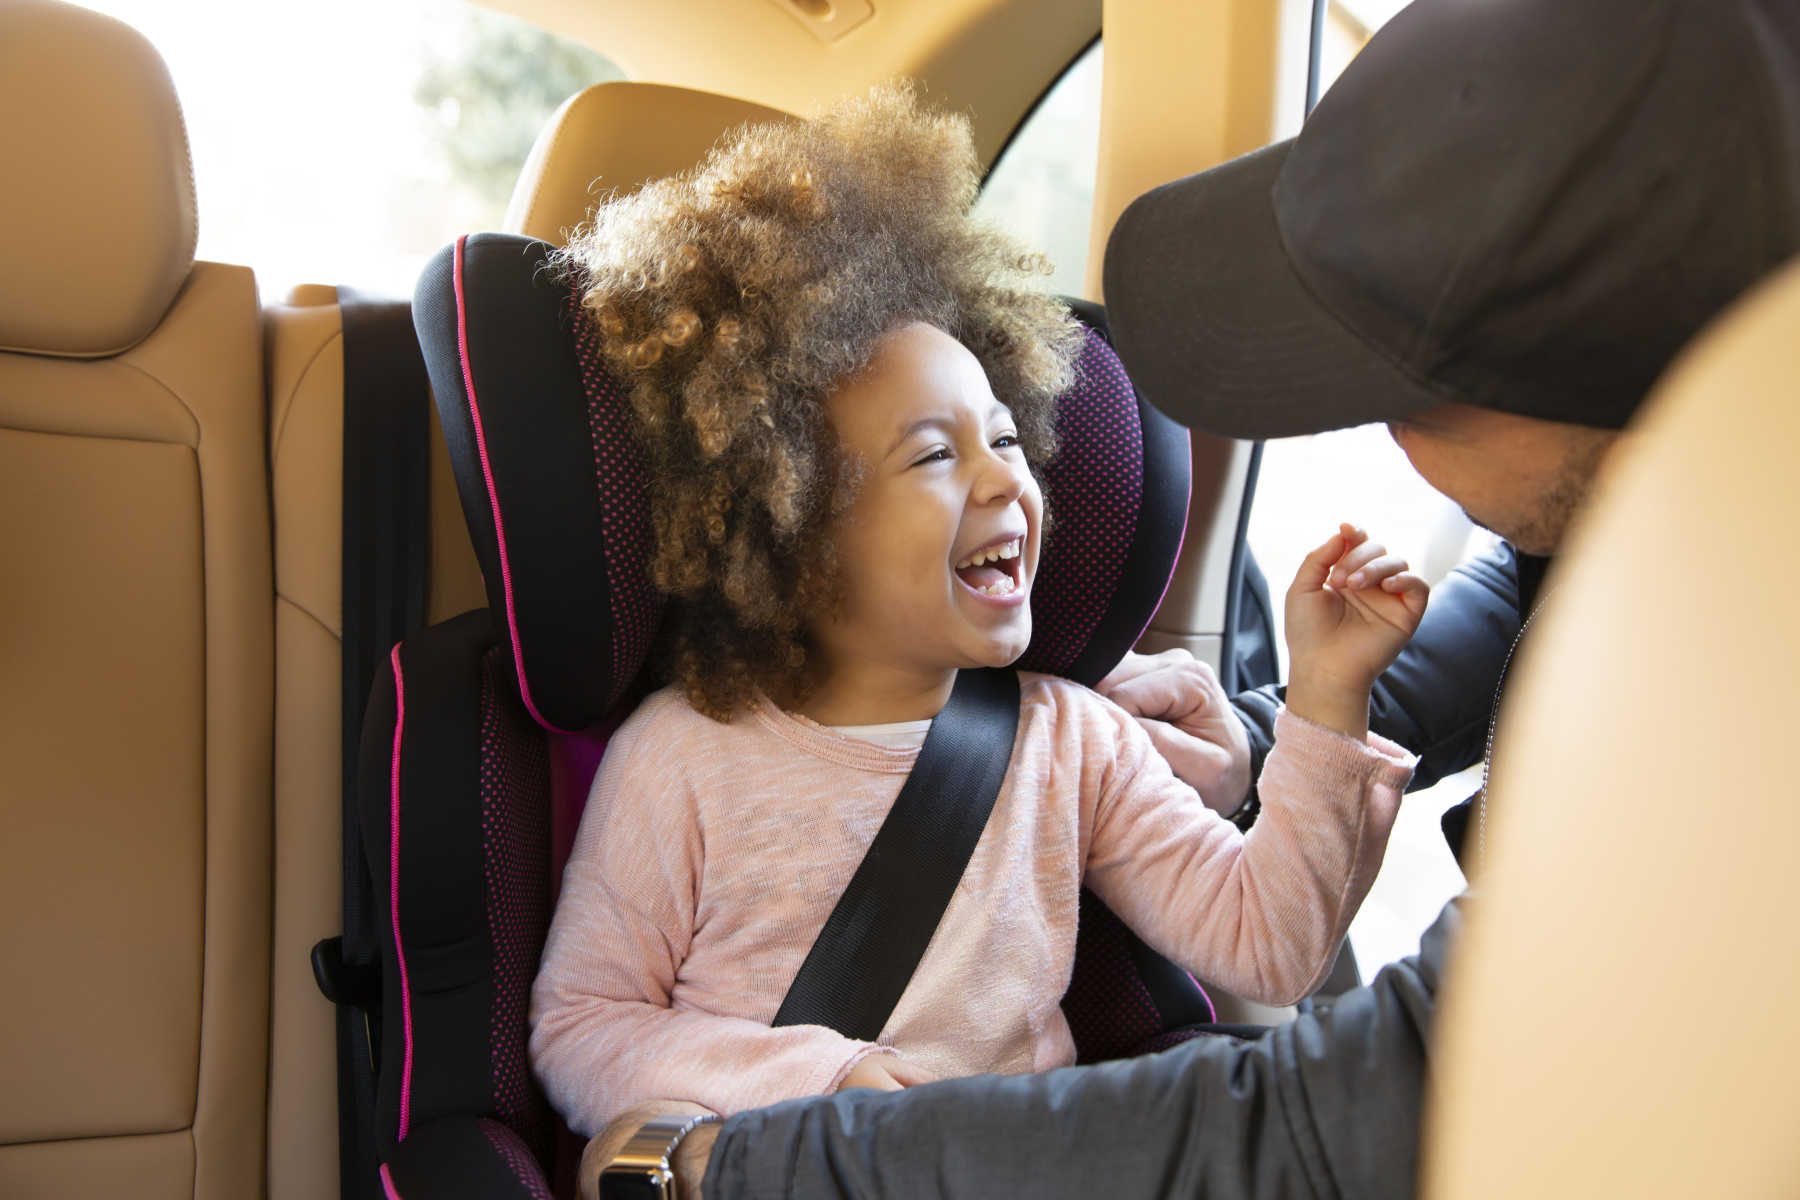 The Best Car Seats For 4 Year Olds, Best Booster Car Seat For 4 Year Old